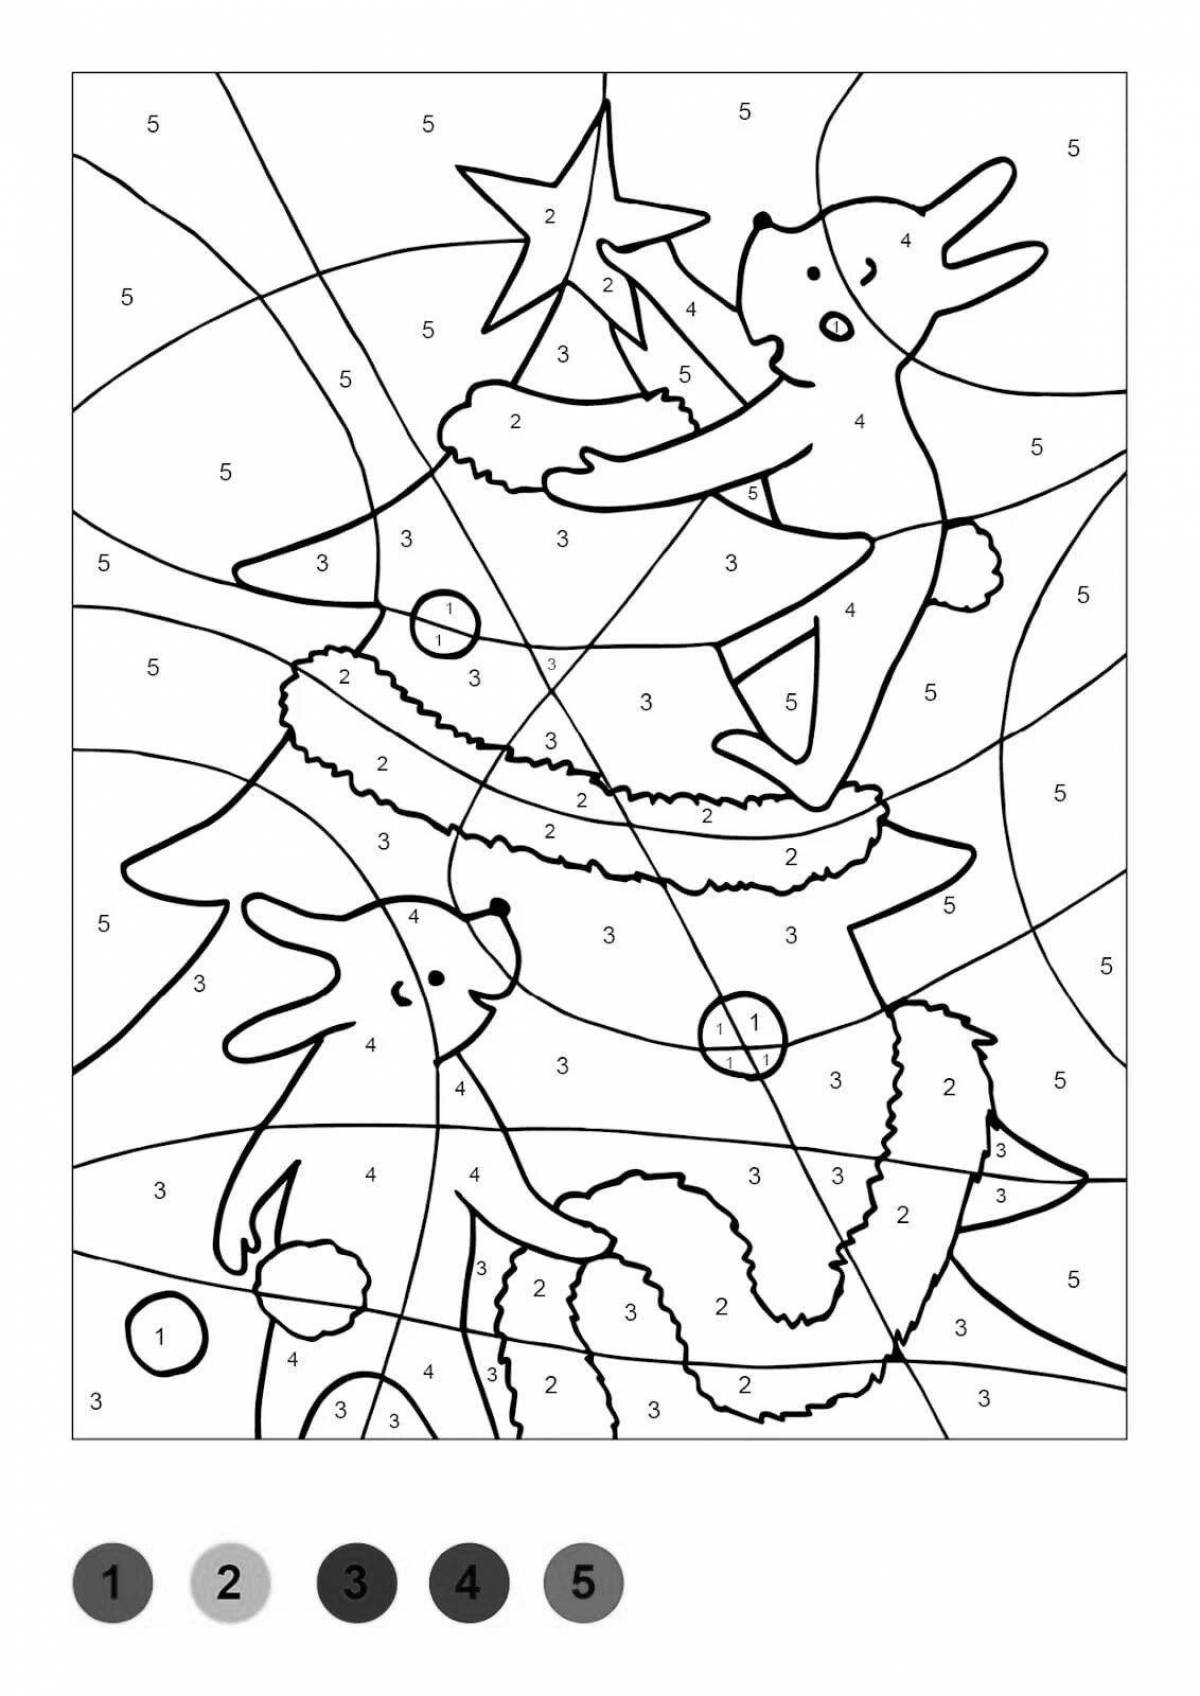 Charming winter coloring by numbers